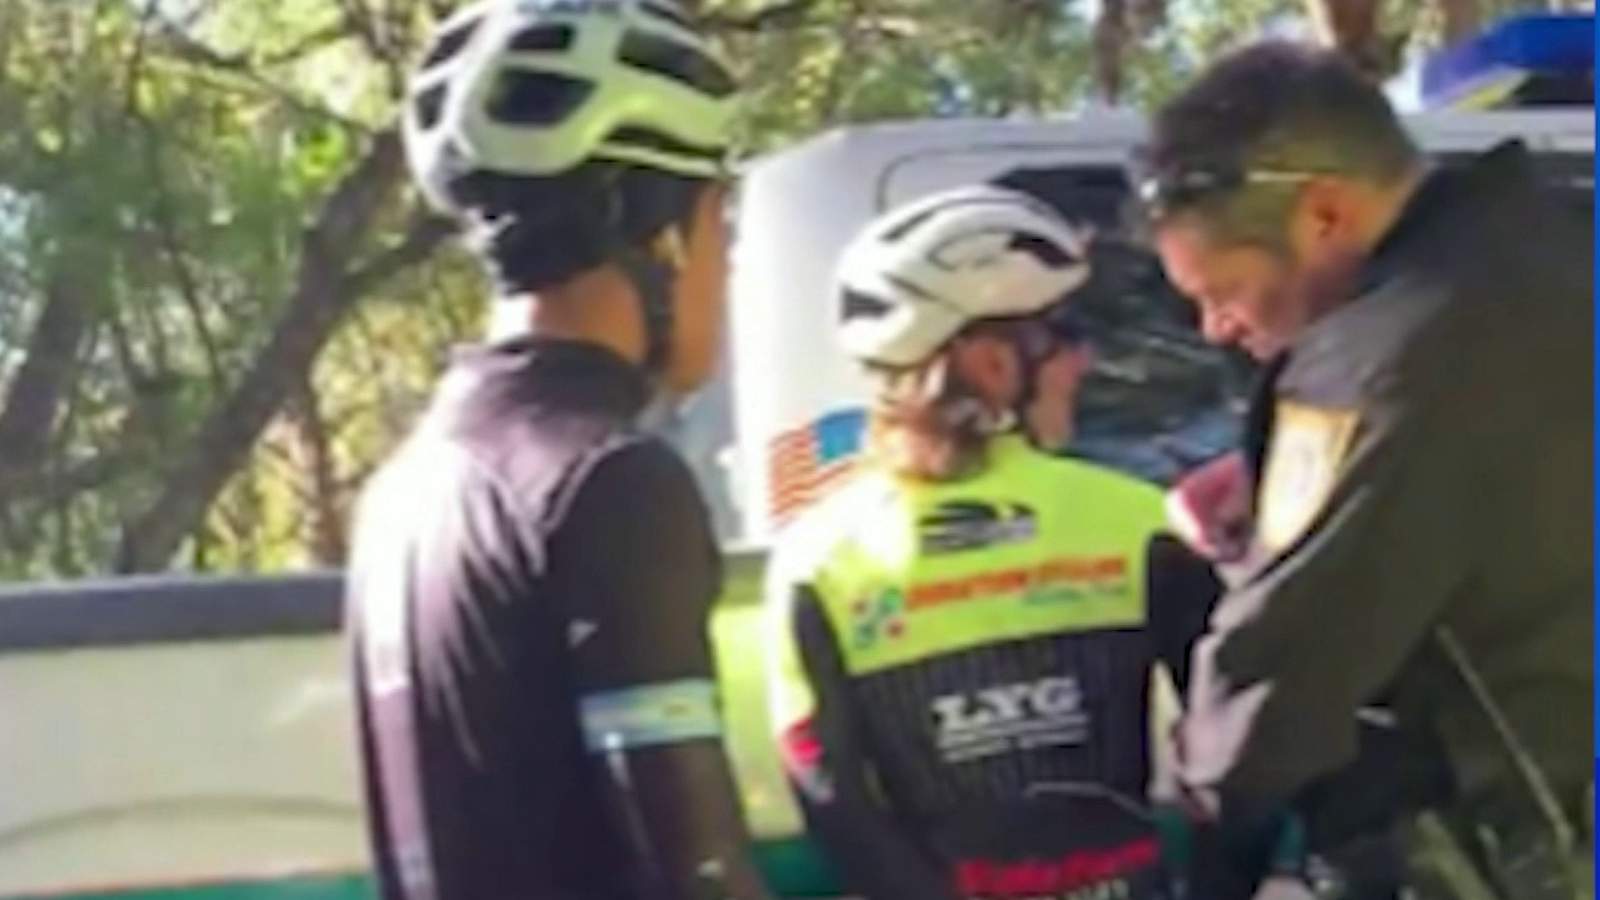 Young bicyclist’s arrest in Seminole County ‘concerning;’ advocates demand apology